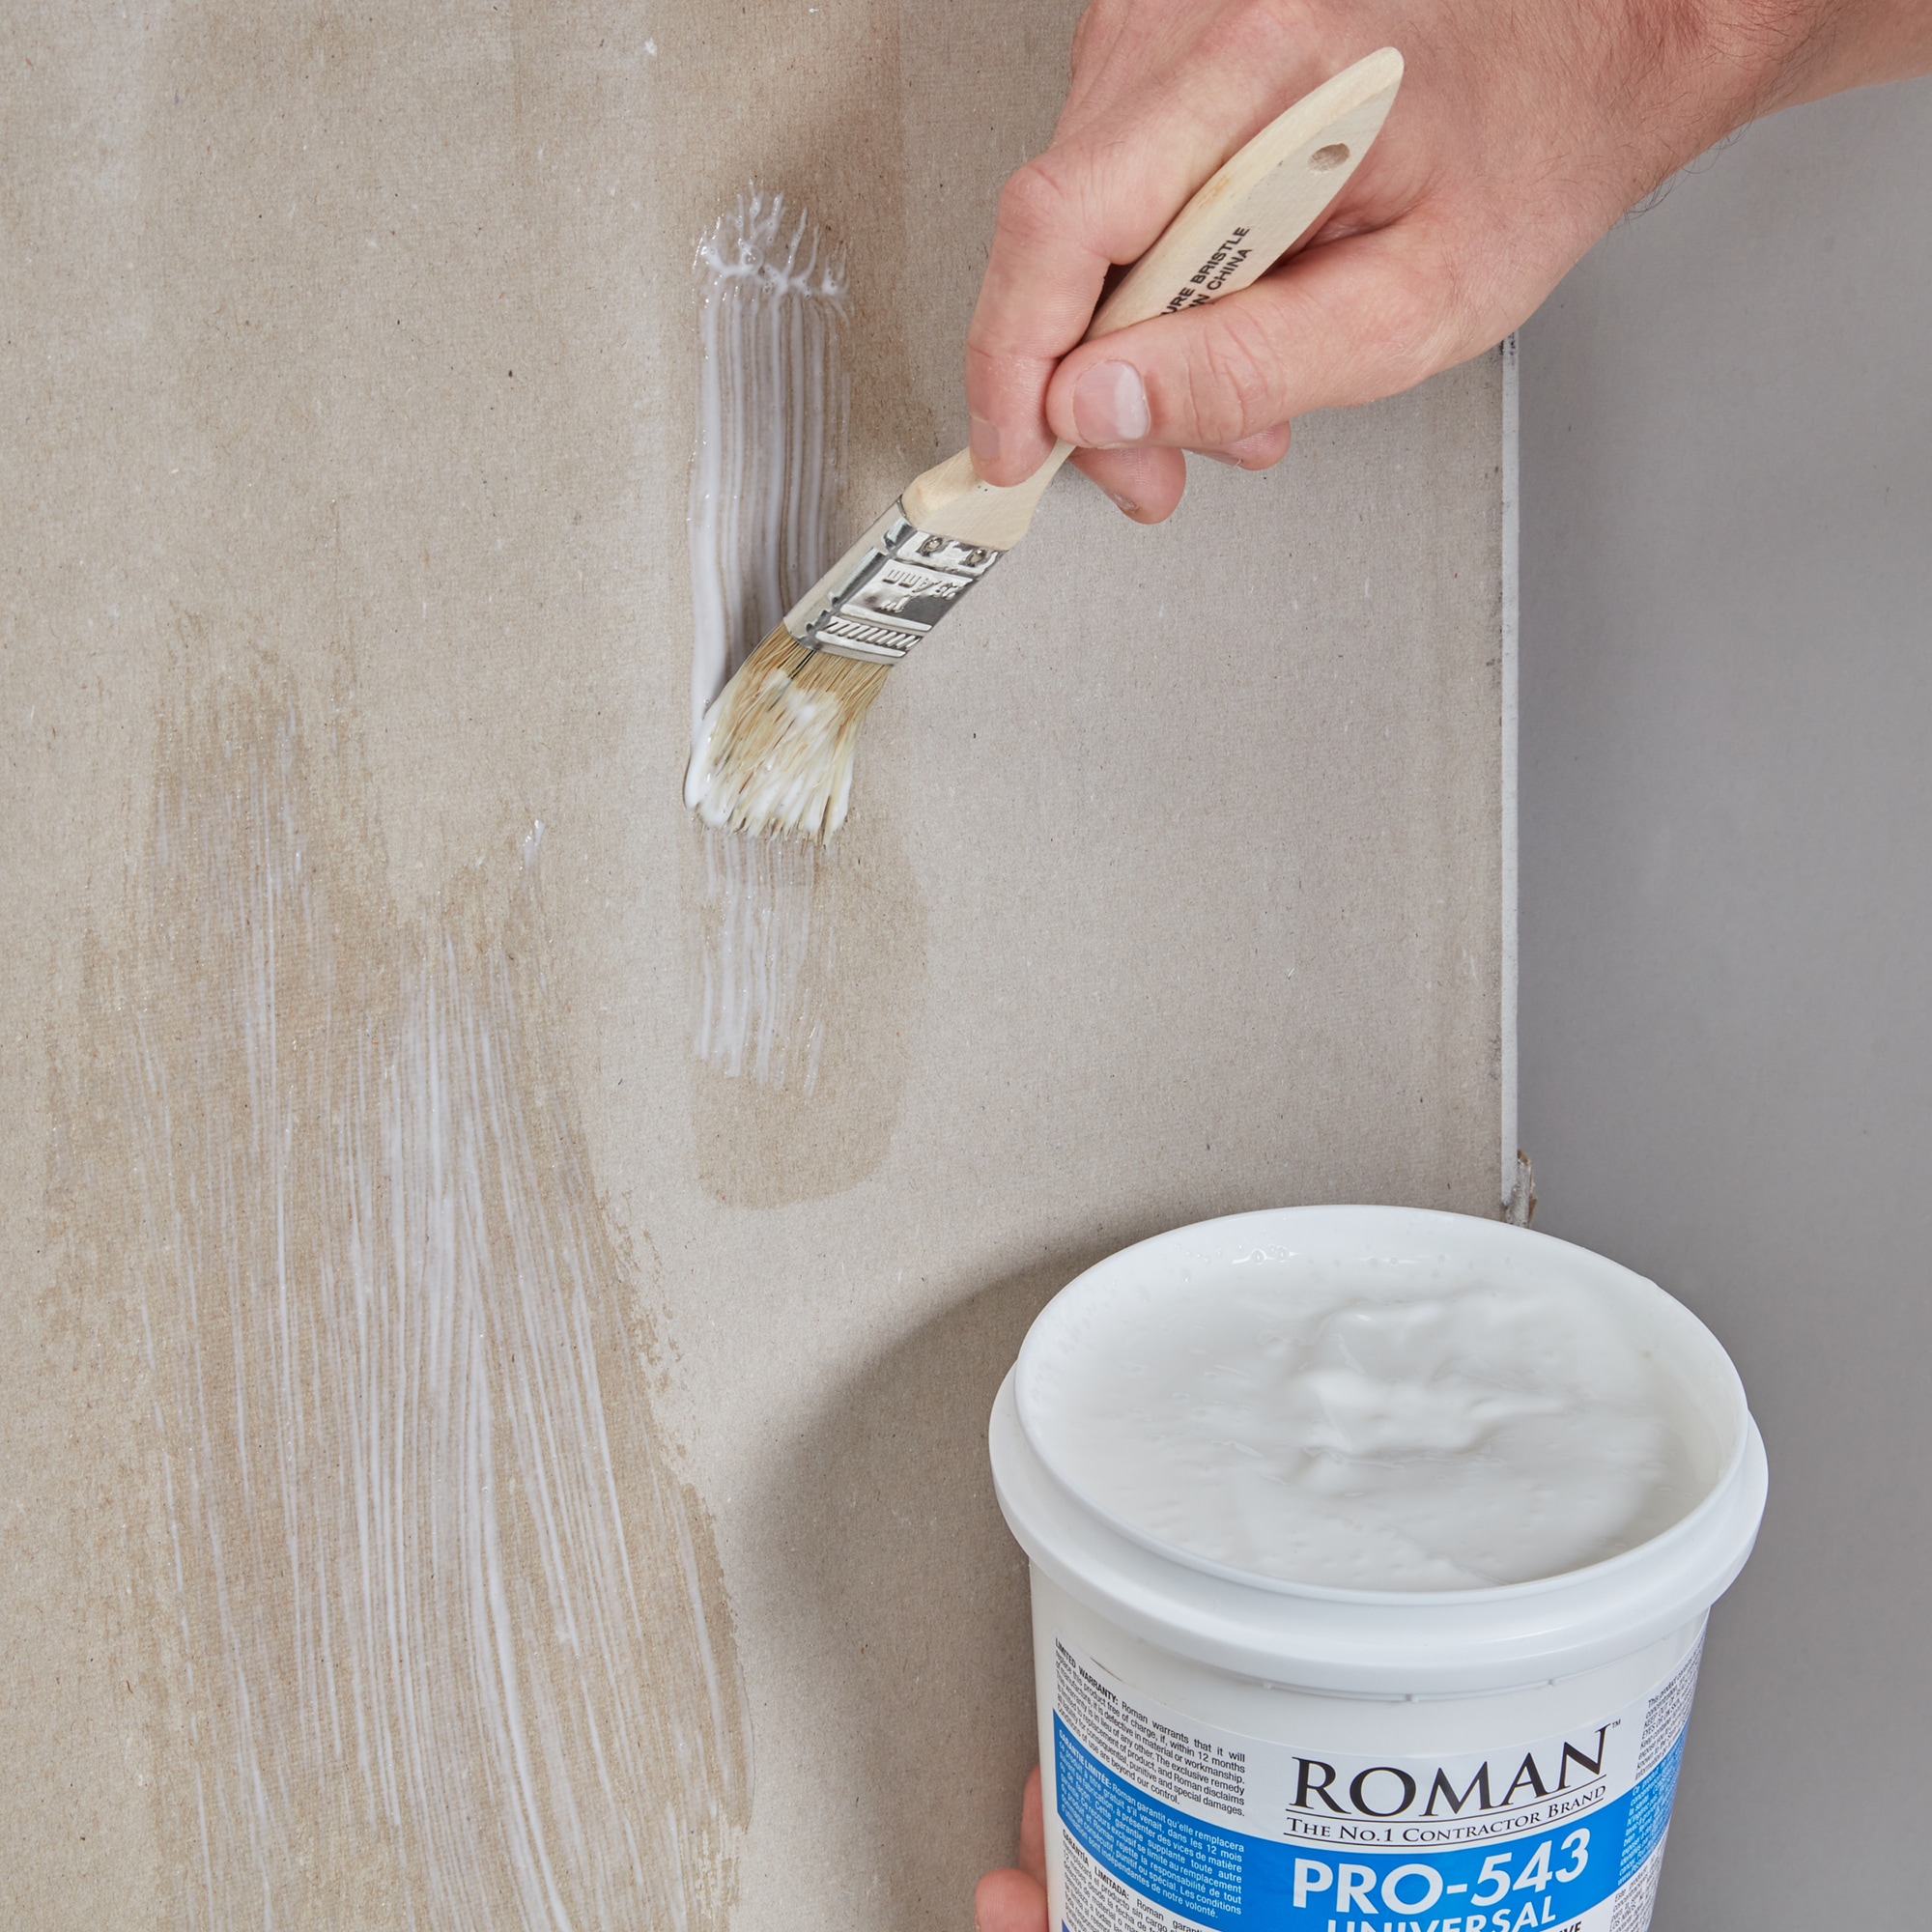 ROMAN Products Universal Wallpaper Paste for Lightweight Wallpapers and  Borders, PRO-543 (32 Ounce - 65 sq. ft.), White